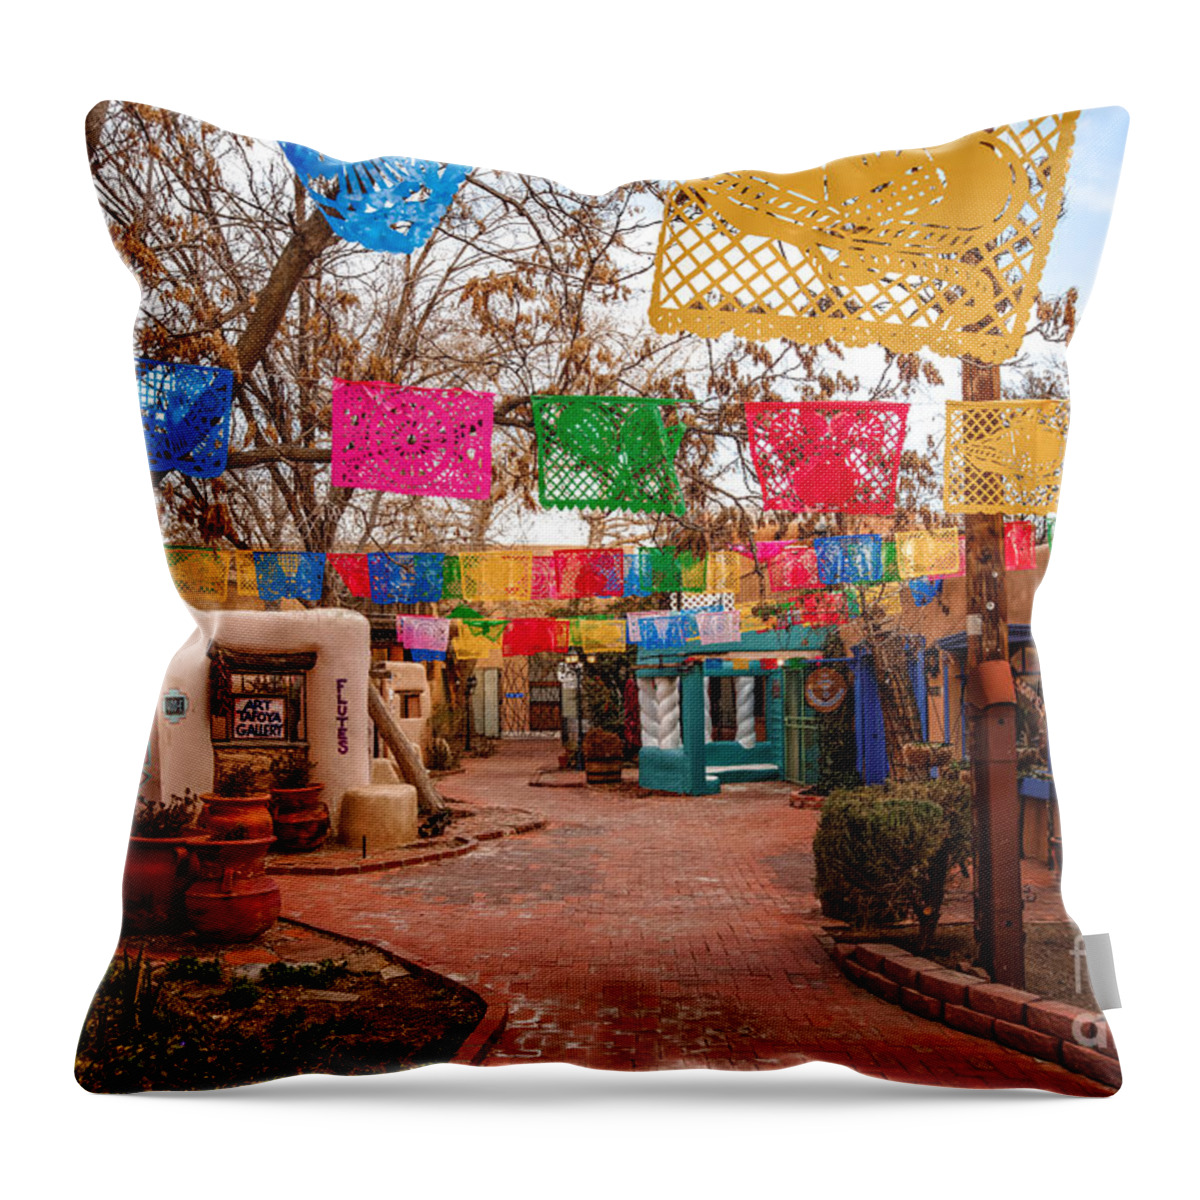 Old Throw Pillow featuring the photograph Secret Passageway at Old Town Albuquerque II - New Mexico by Silvio Ligutti